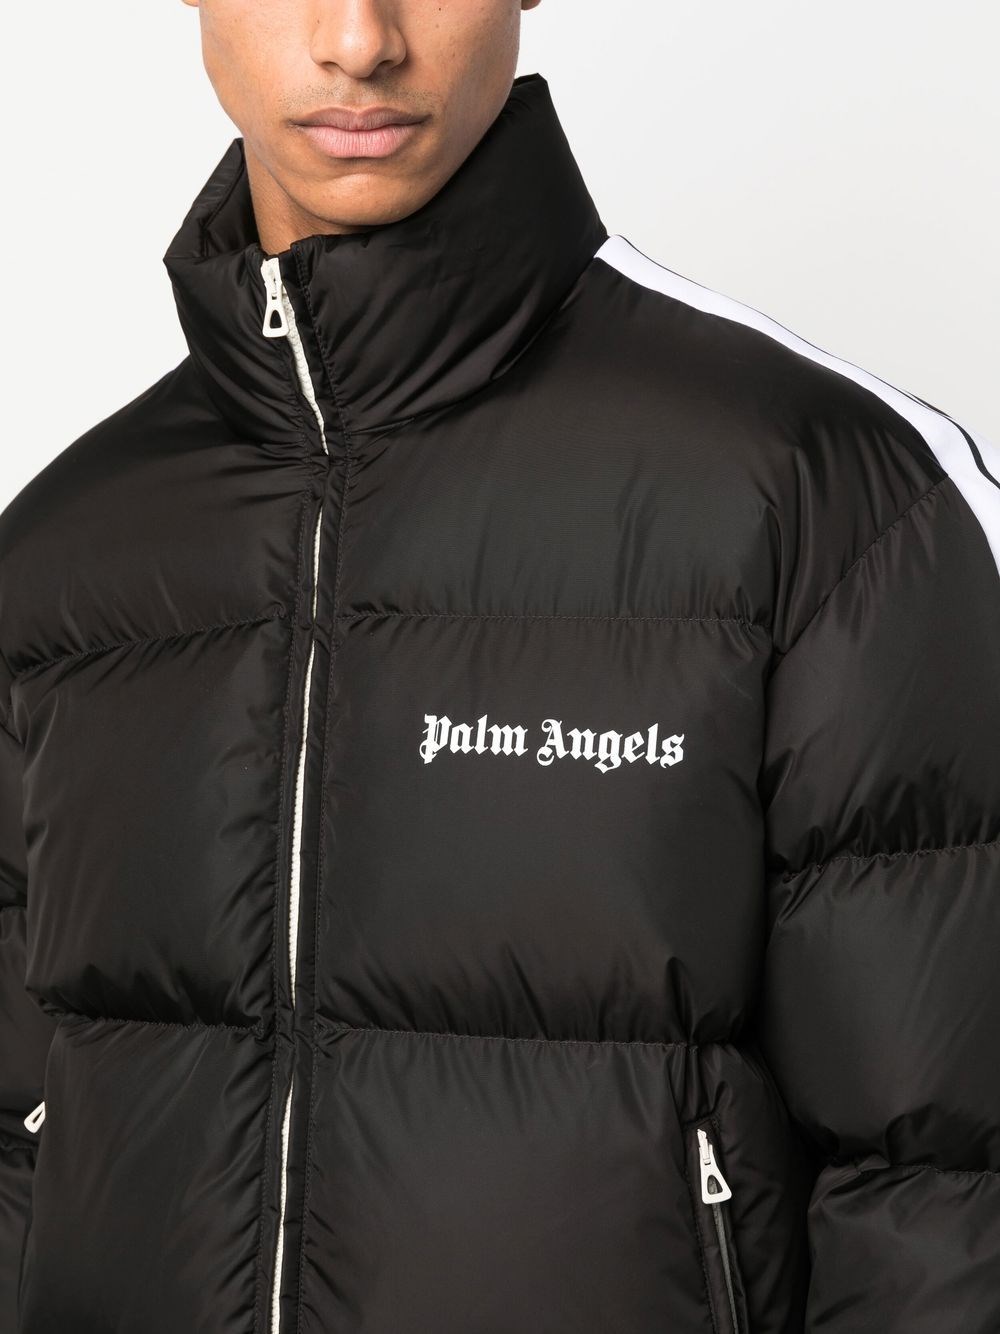 palm angels JACKET available on montiboutique.com - 51149